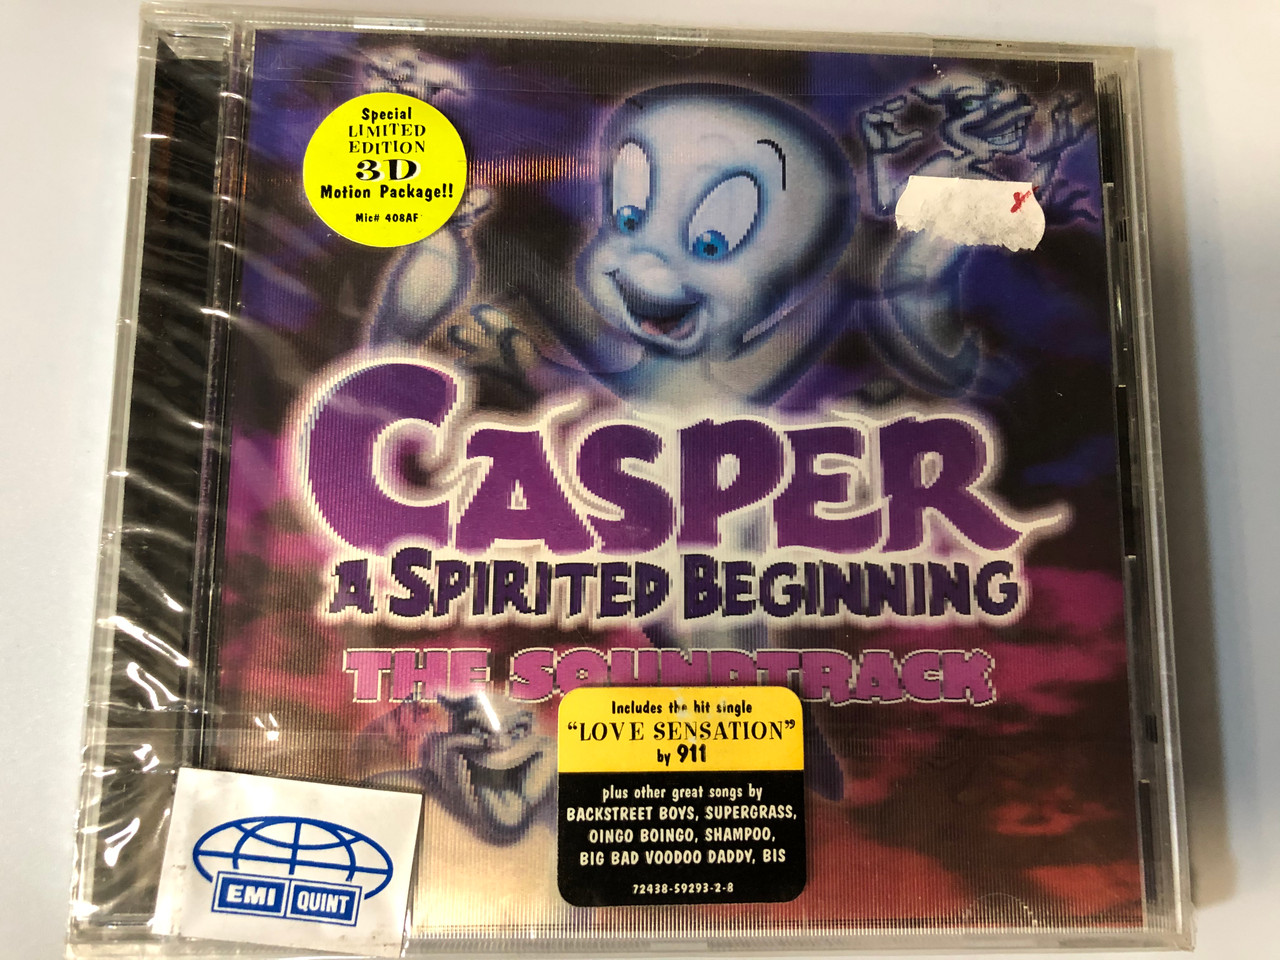 https://cdn10.bigcommerce.com/s-62bdpkt7pb/products/28109/images/168332/Casper_-_A_Spirited_Beginning_The_Soundtrack_Includes_the_hit_single_Love_Sensation_by_911_Plus_other_great_songs_by_Backstreet_Boys_Supergrass_Oingo_Boingo_Shampoo_Big_Bad_Voodoo_1__26112.1613471688.1280.1280.JPG?c=2&_ga=2.12464816.543434869.1618406858-6505287.1618406858